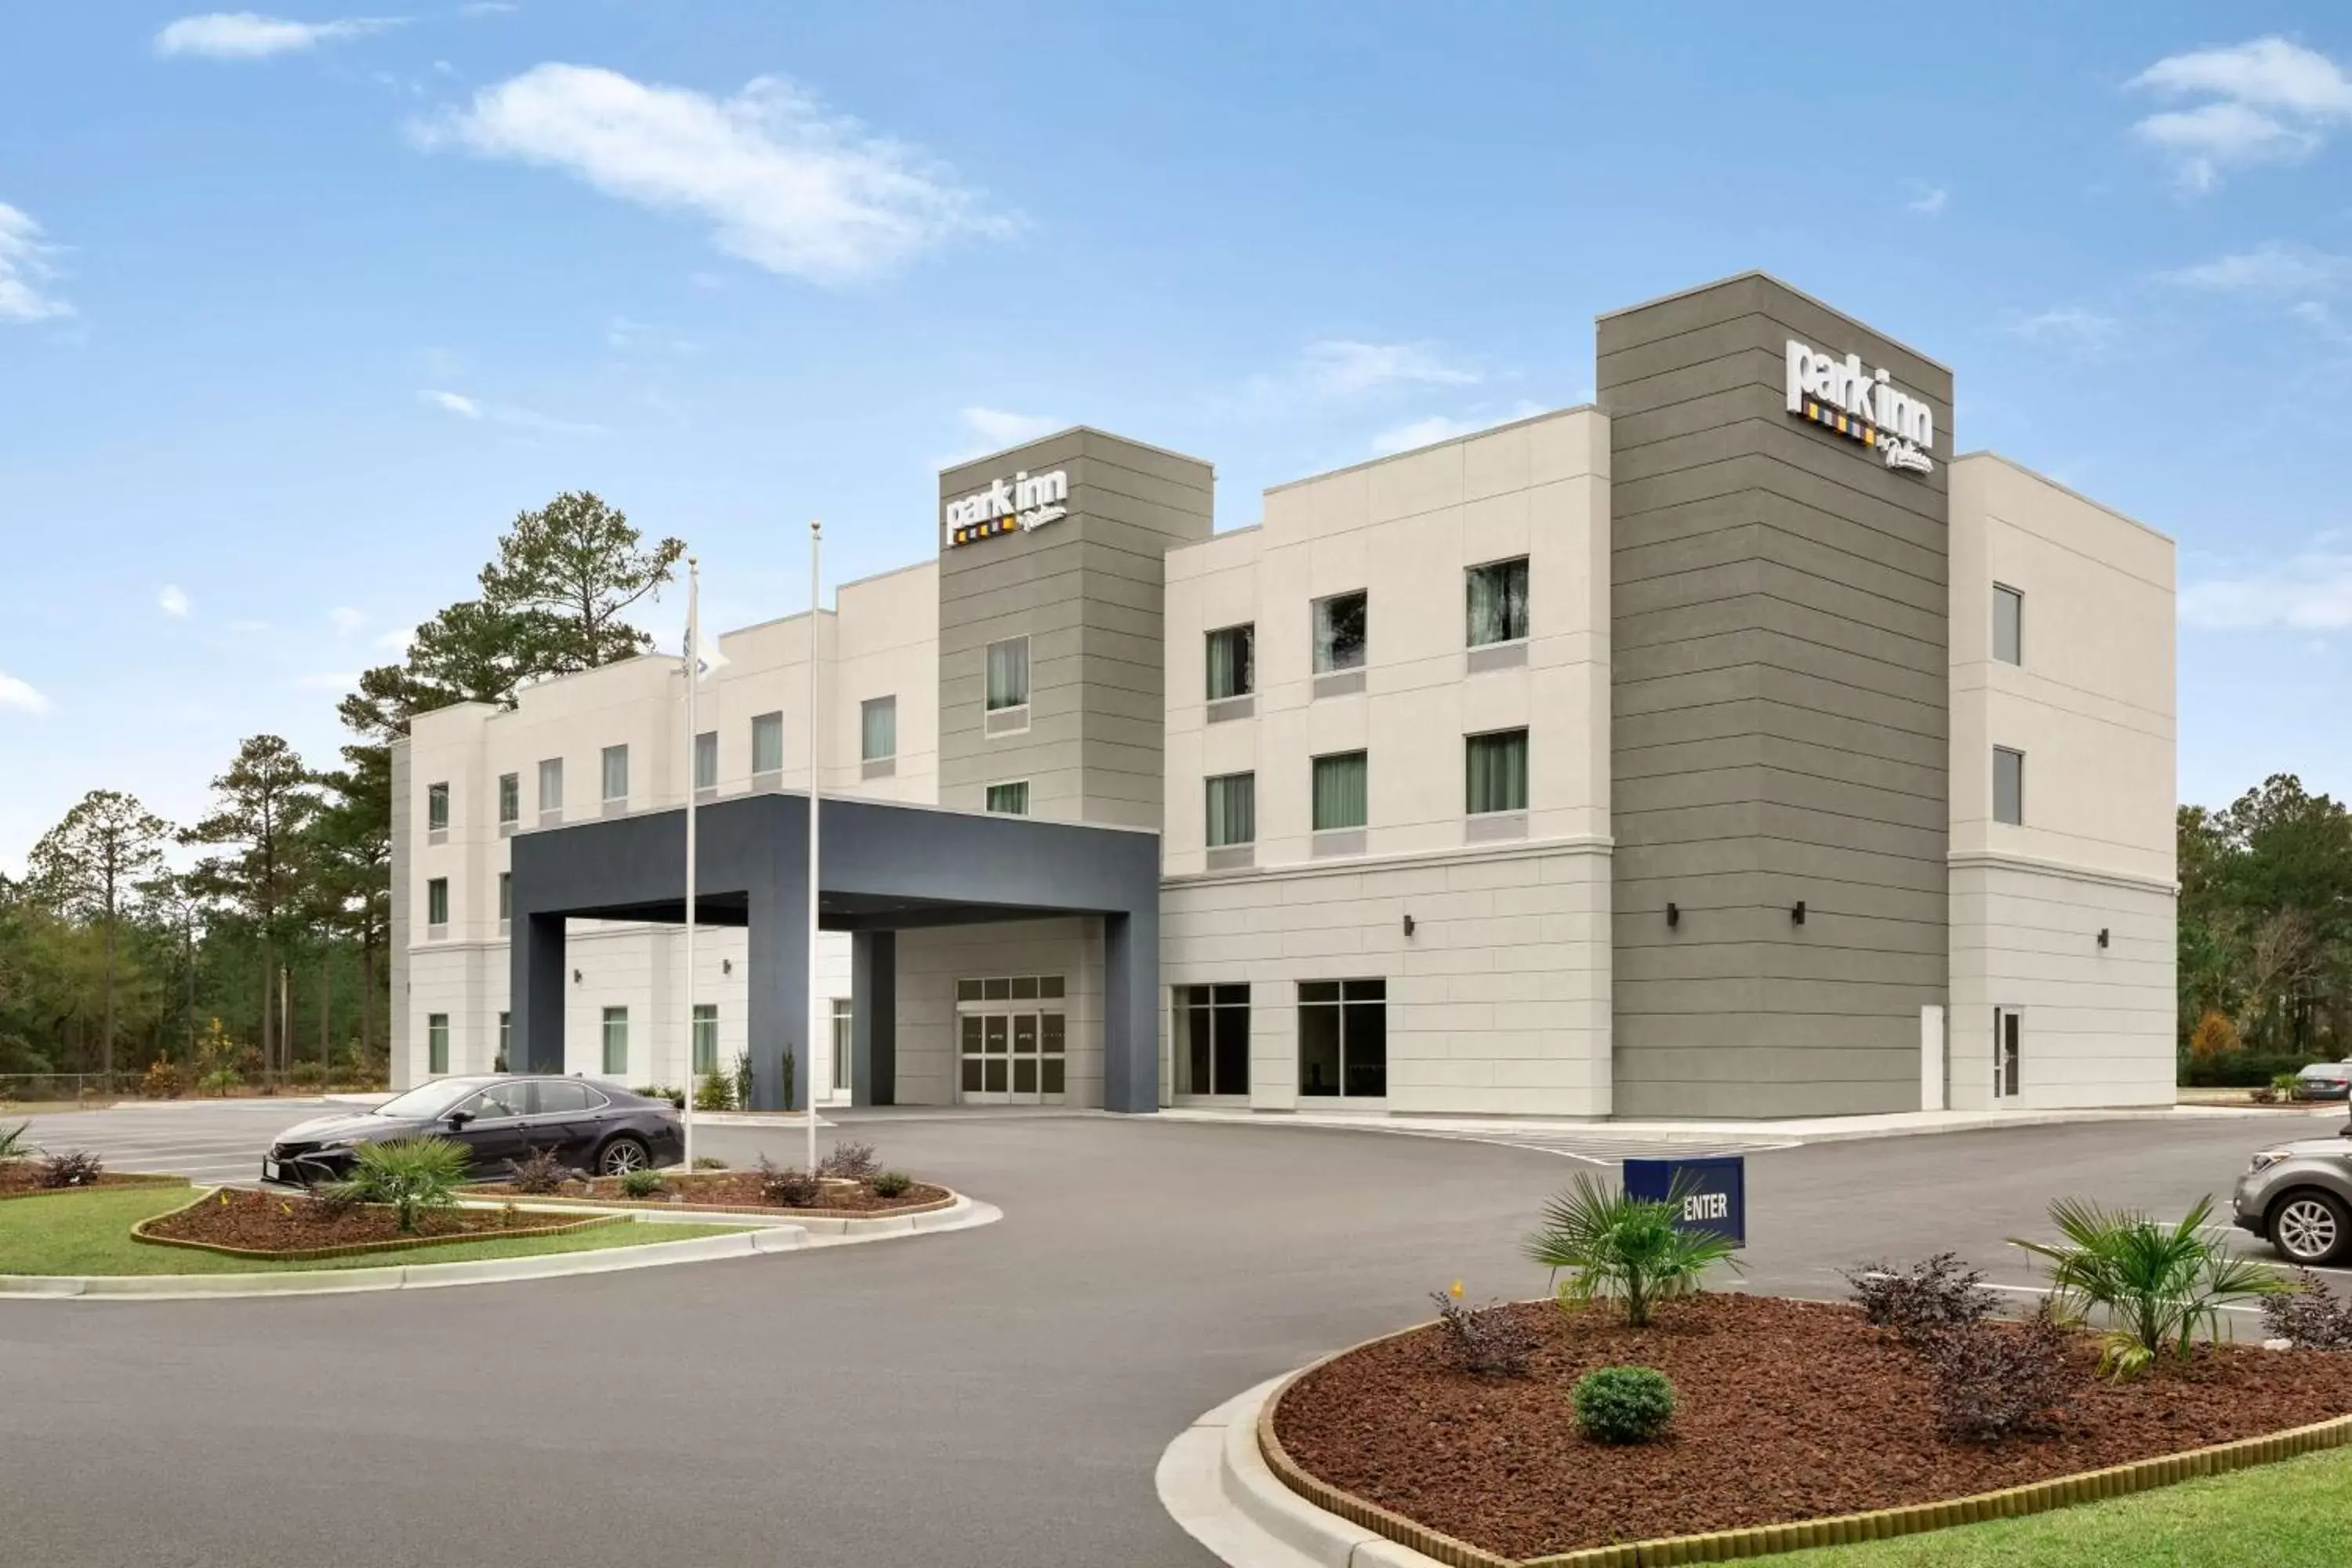 Property Building in Park Inn by Radisson, Florence, SC